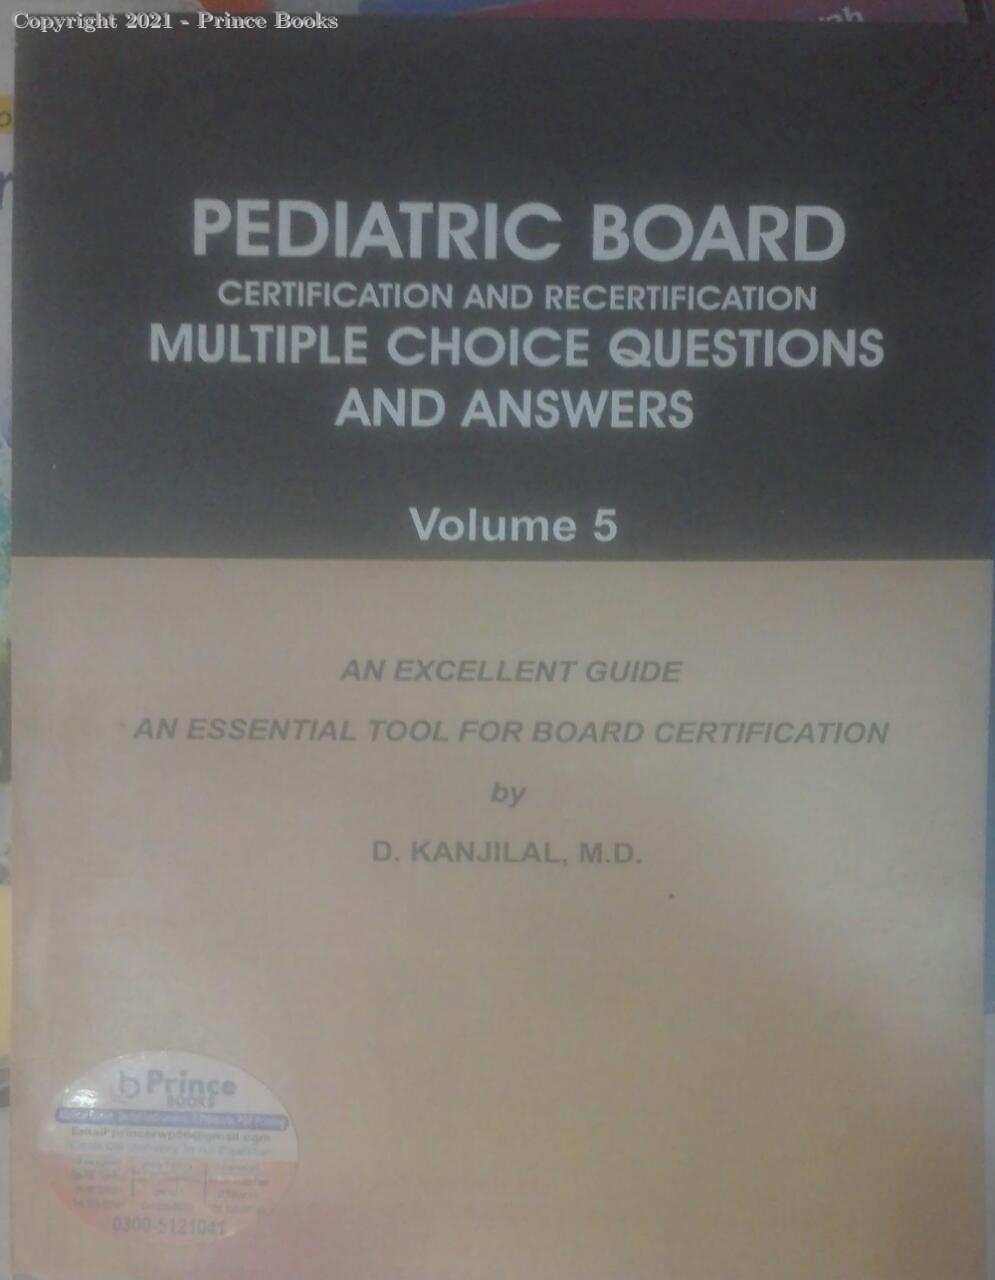 pediatric board certification and recertification multiple choice questions and answers, 5 volulme set